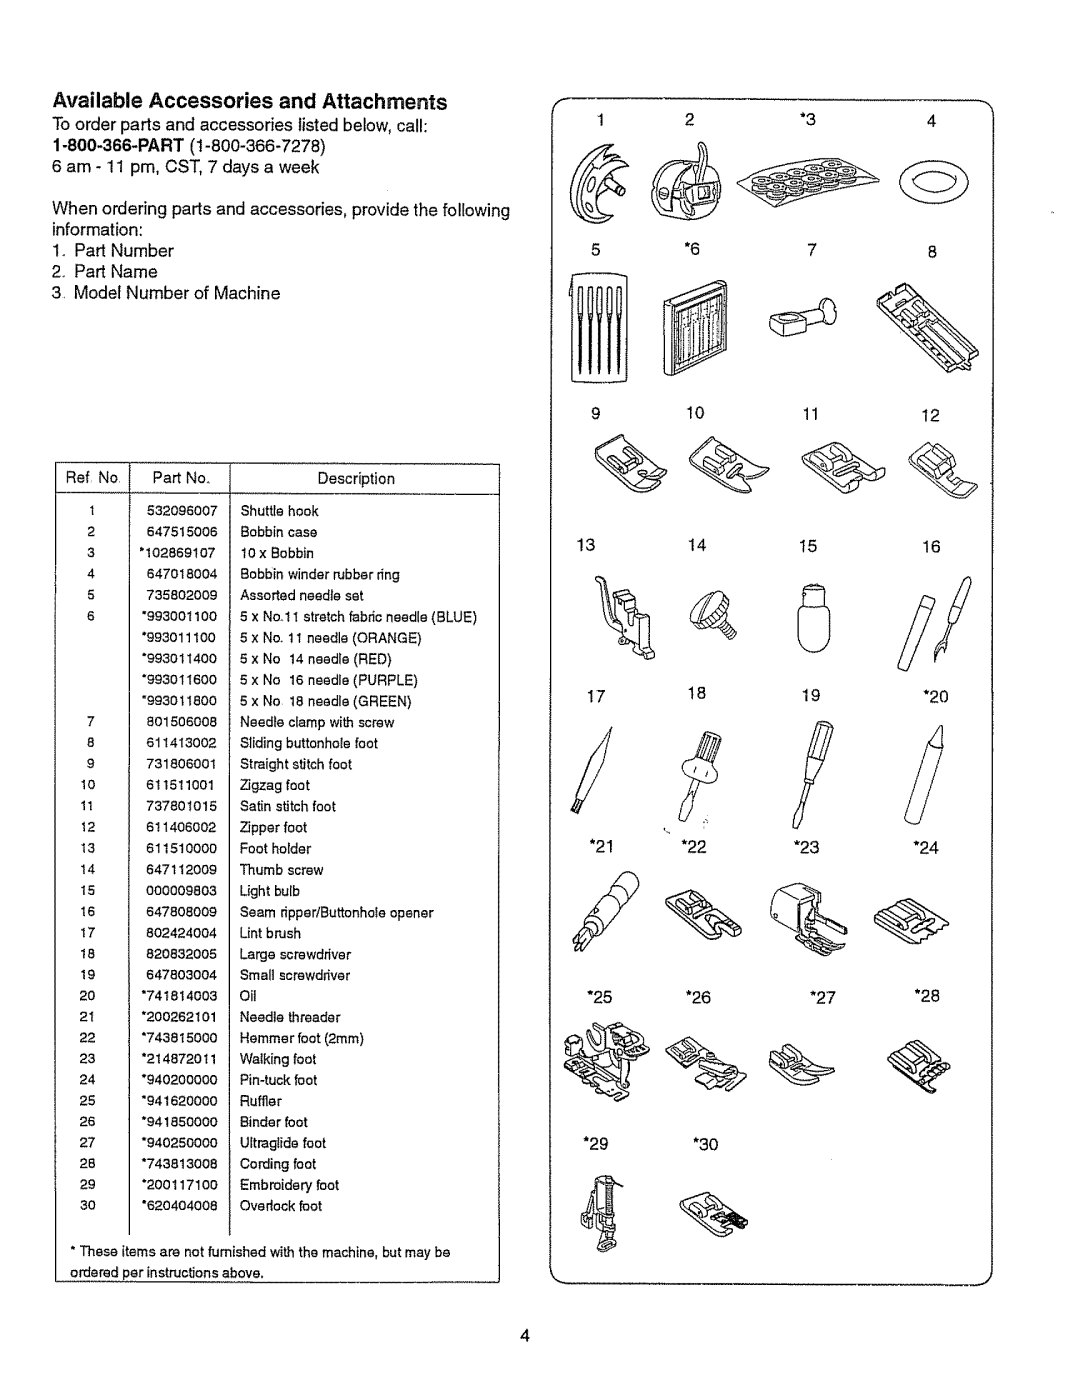 Kenmore 385.151082 owner manual Available Accessories and Attachments, Case 